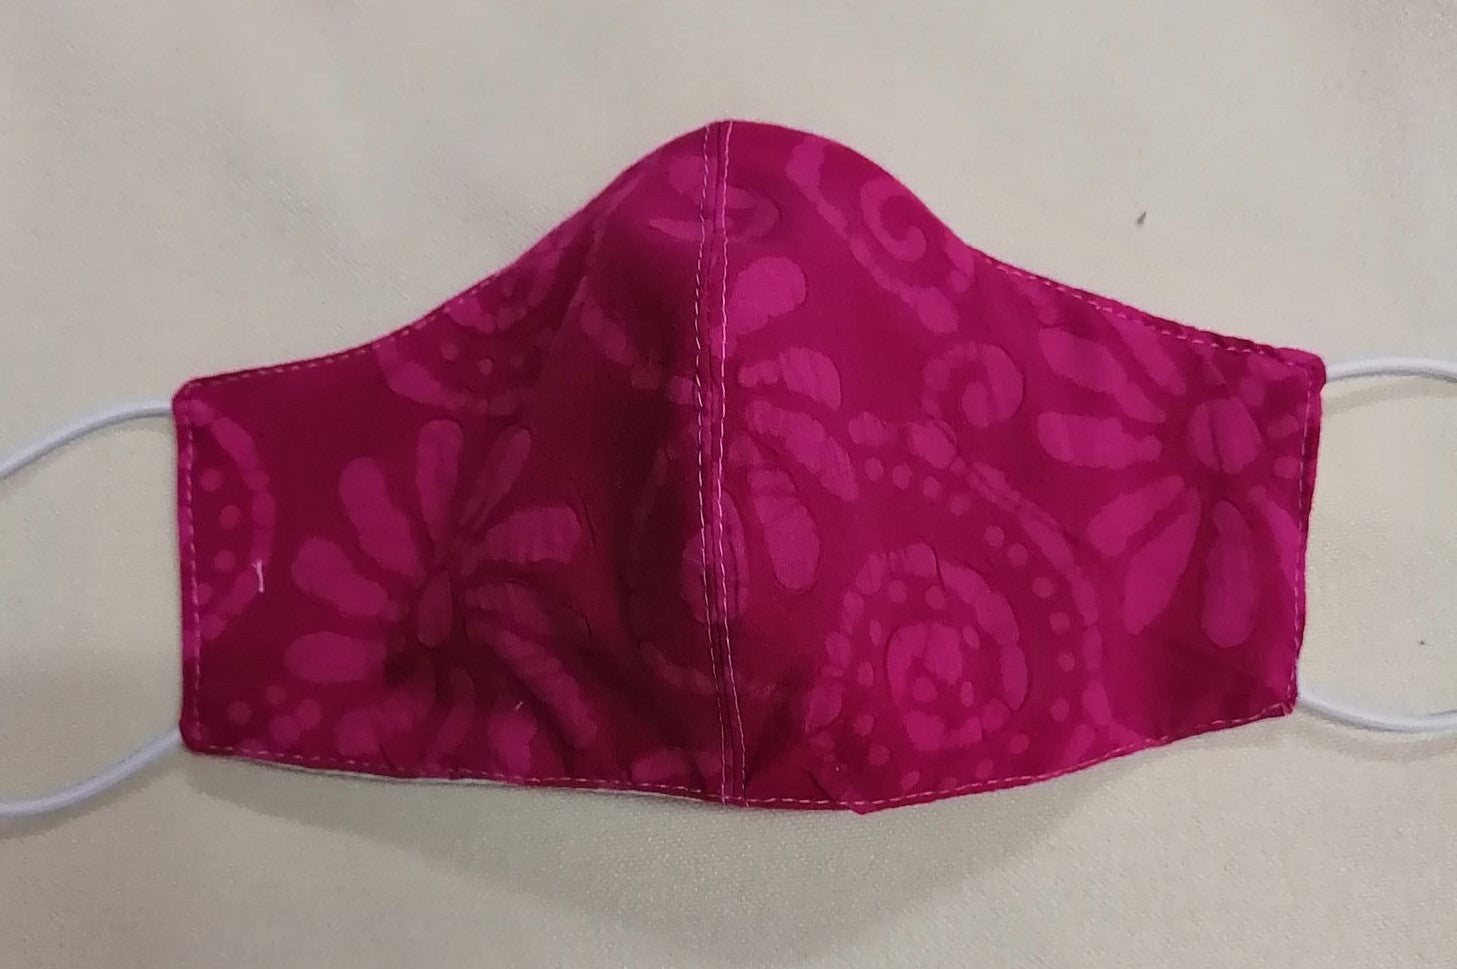 shaped facemask in hot pink cotton fabric